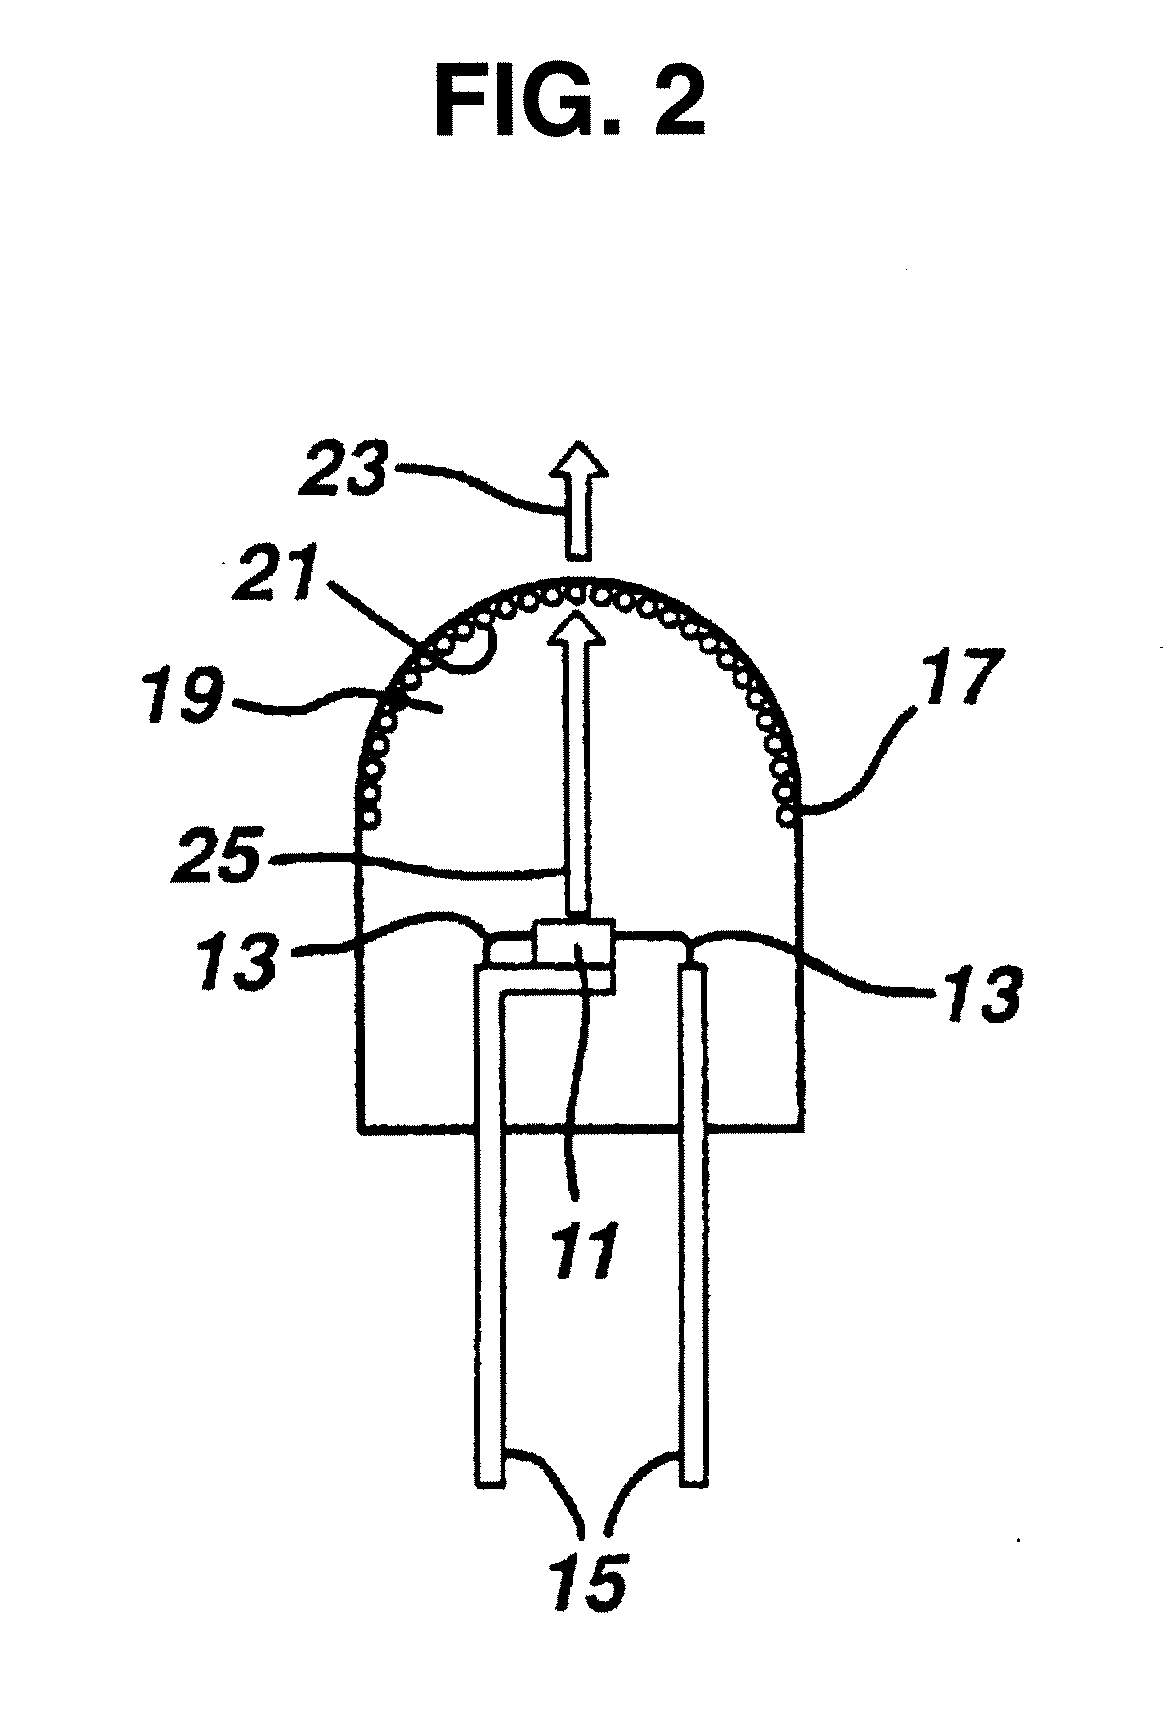 Phosphor down converting element for an LED package and fabrication method